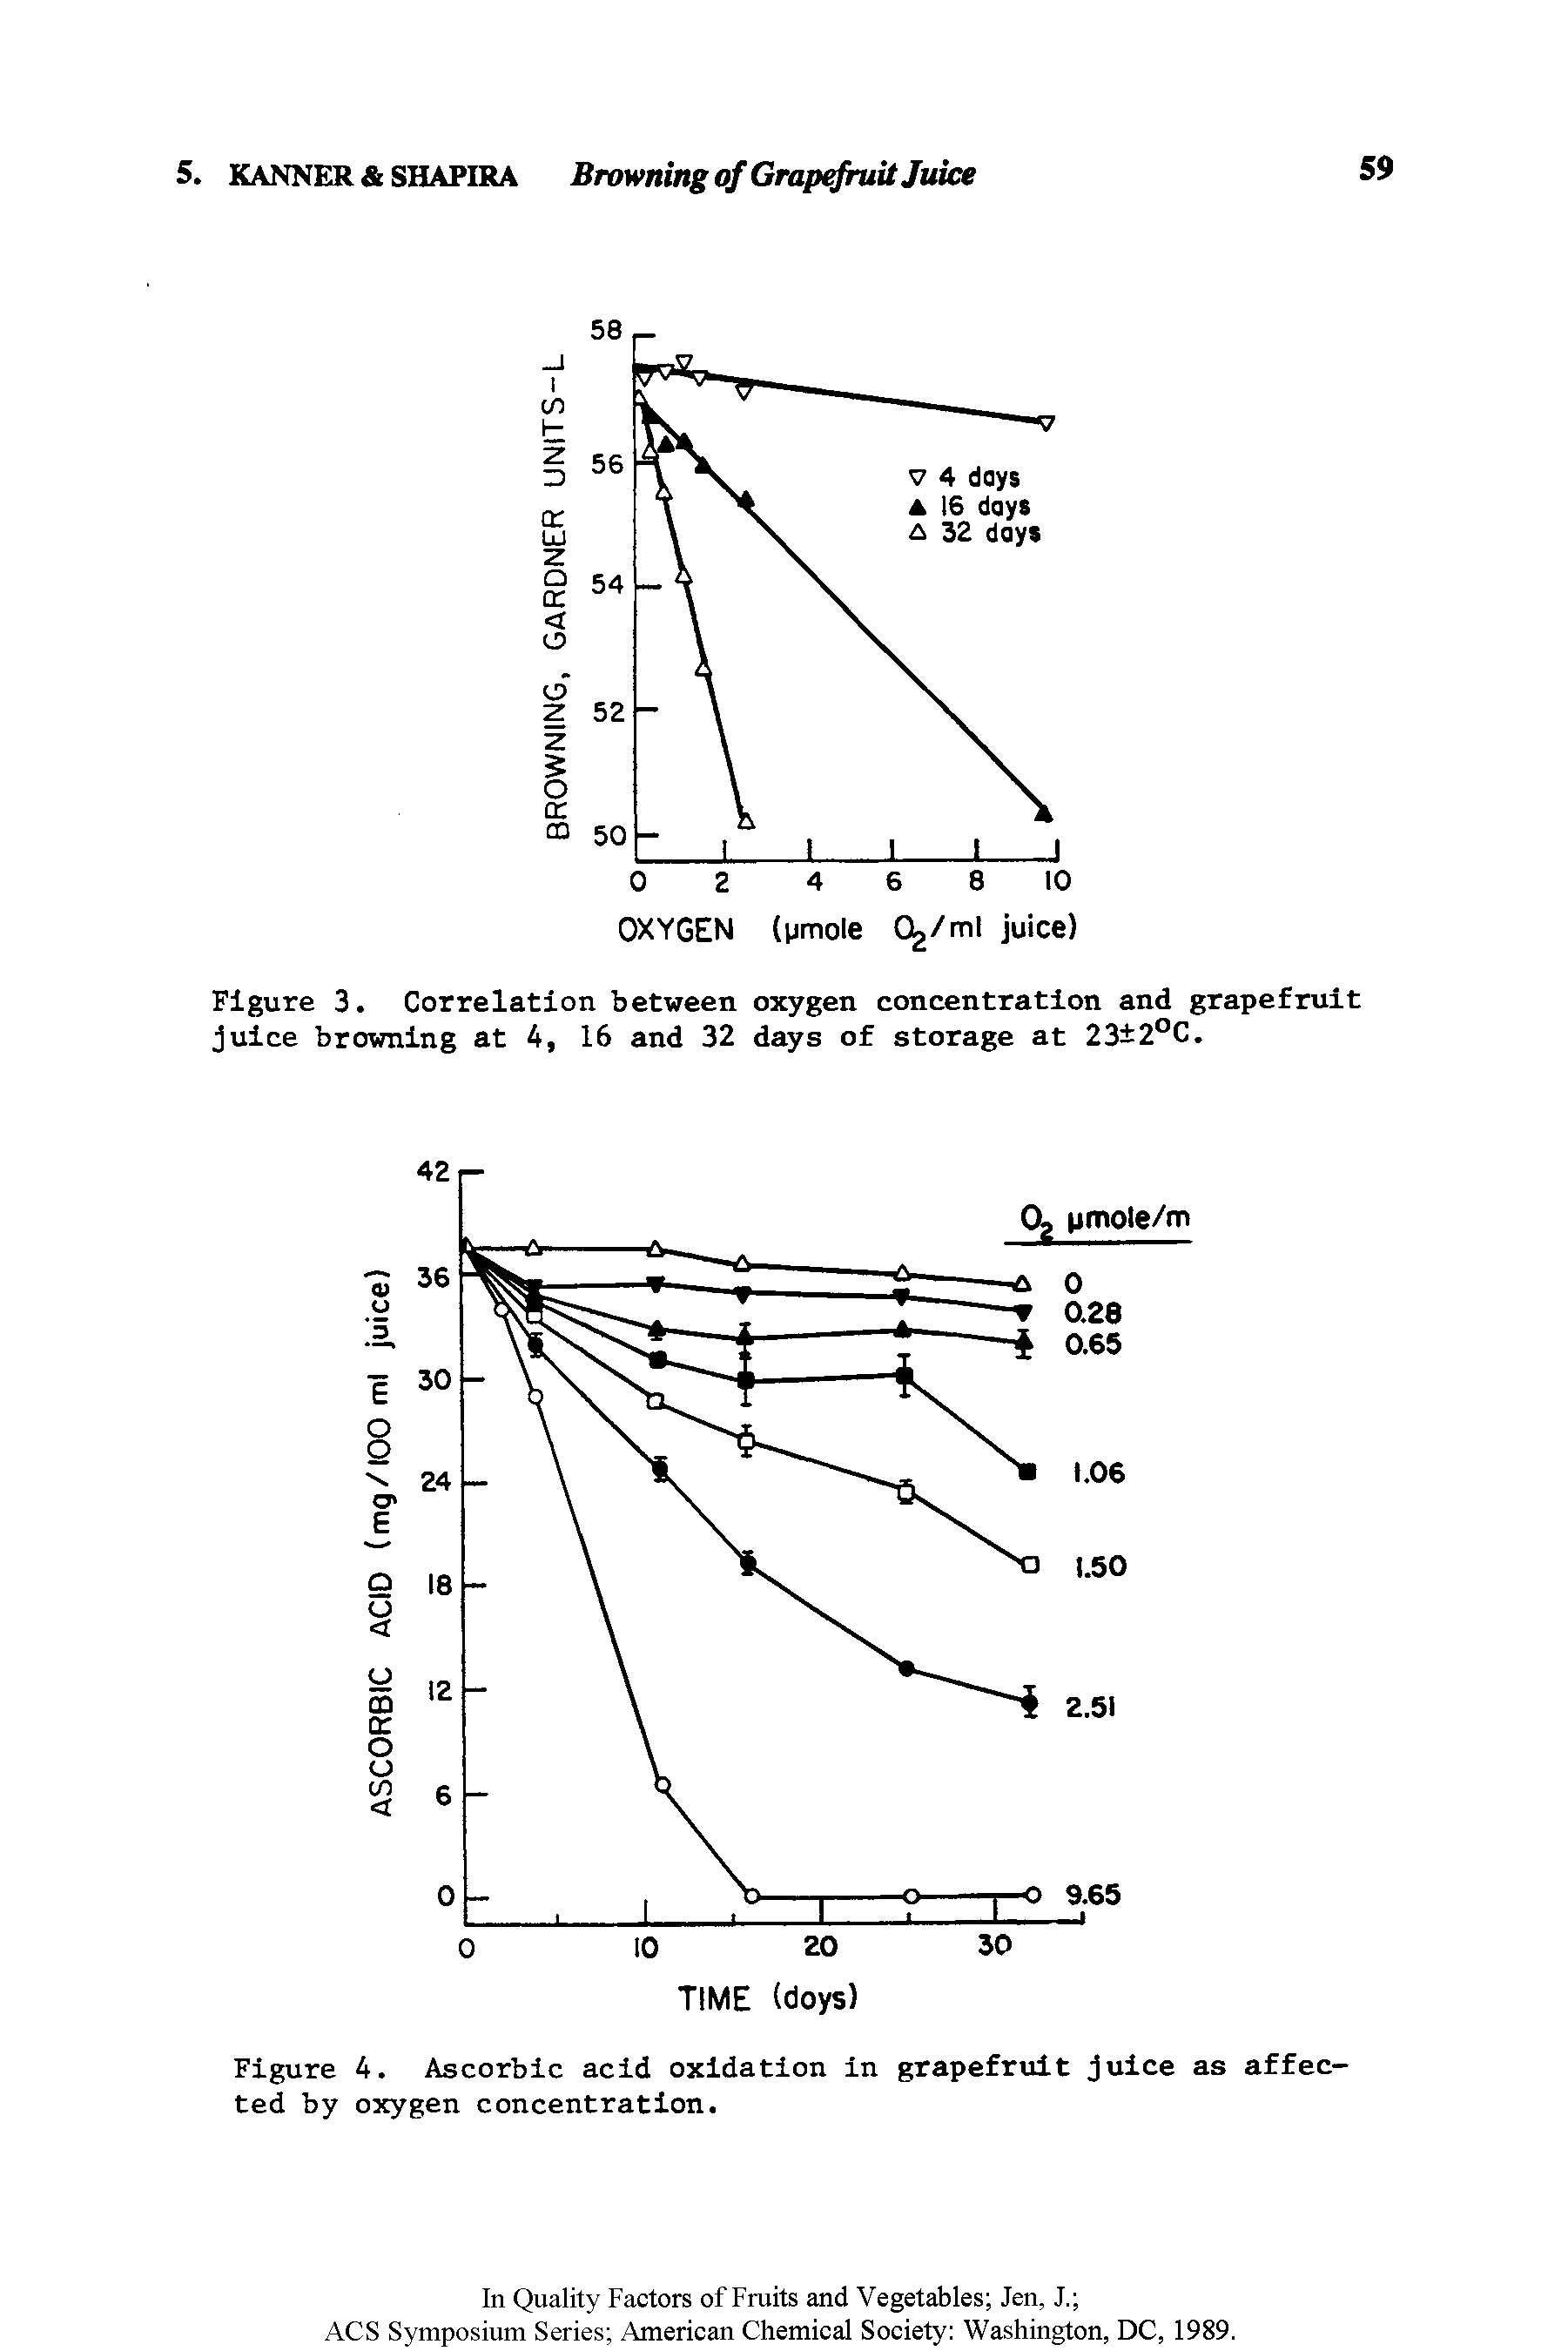 Figure 4. Ascorbic acid oxidation in grapefruit juice as affected by oxygen concentration.